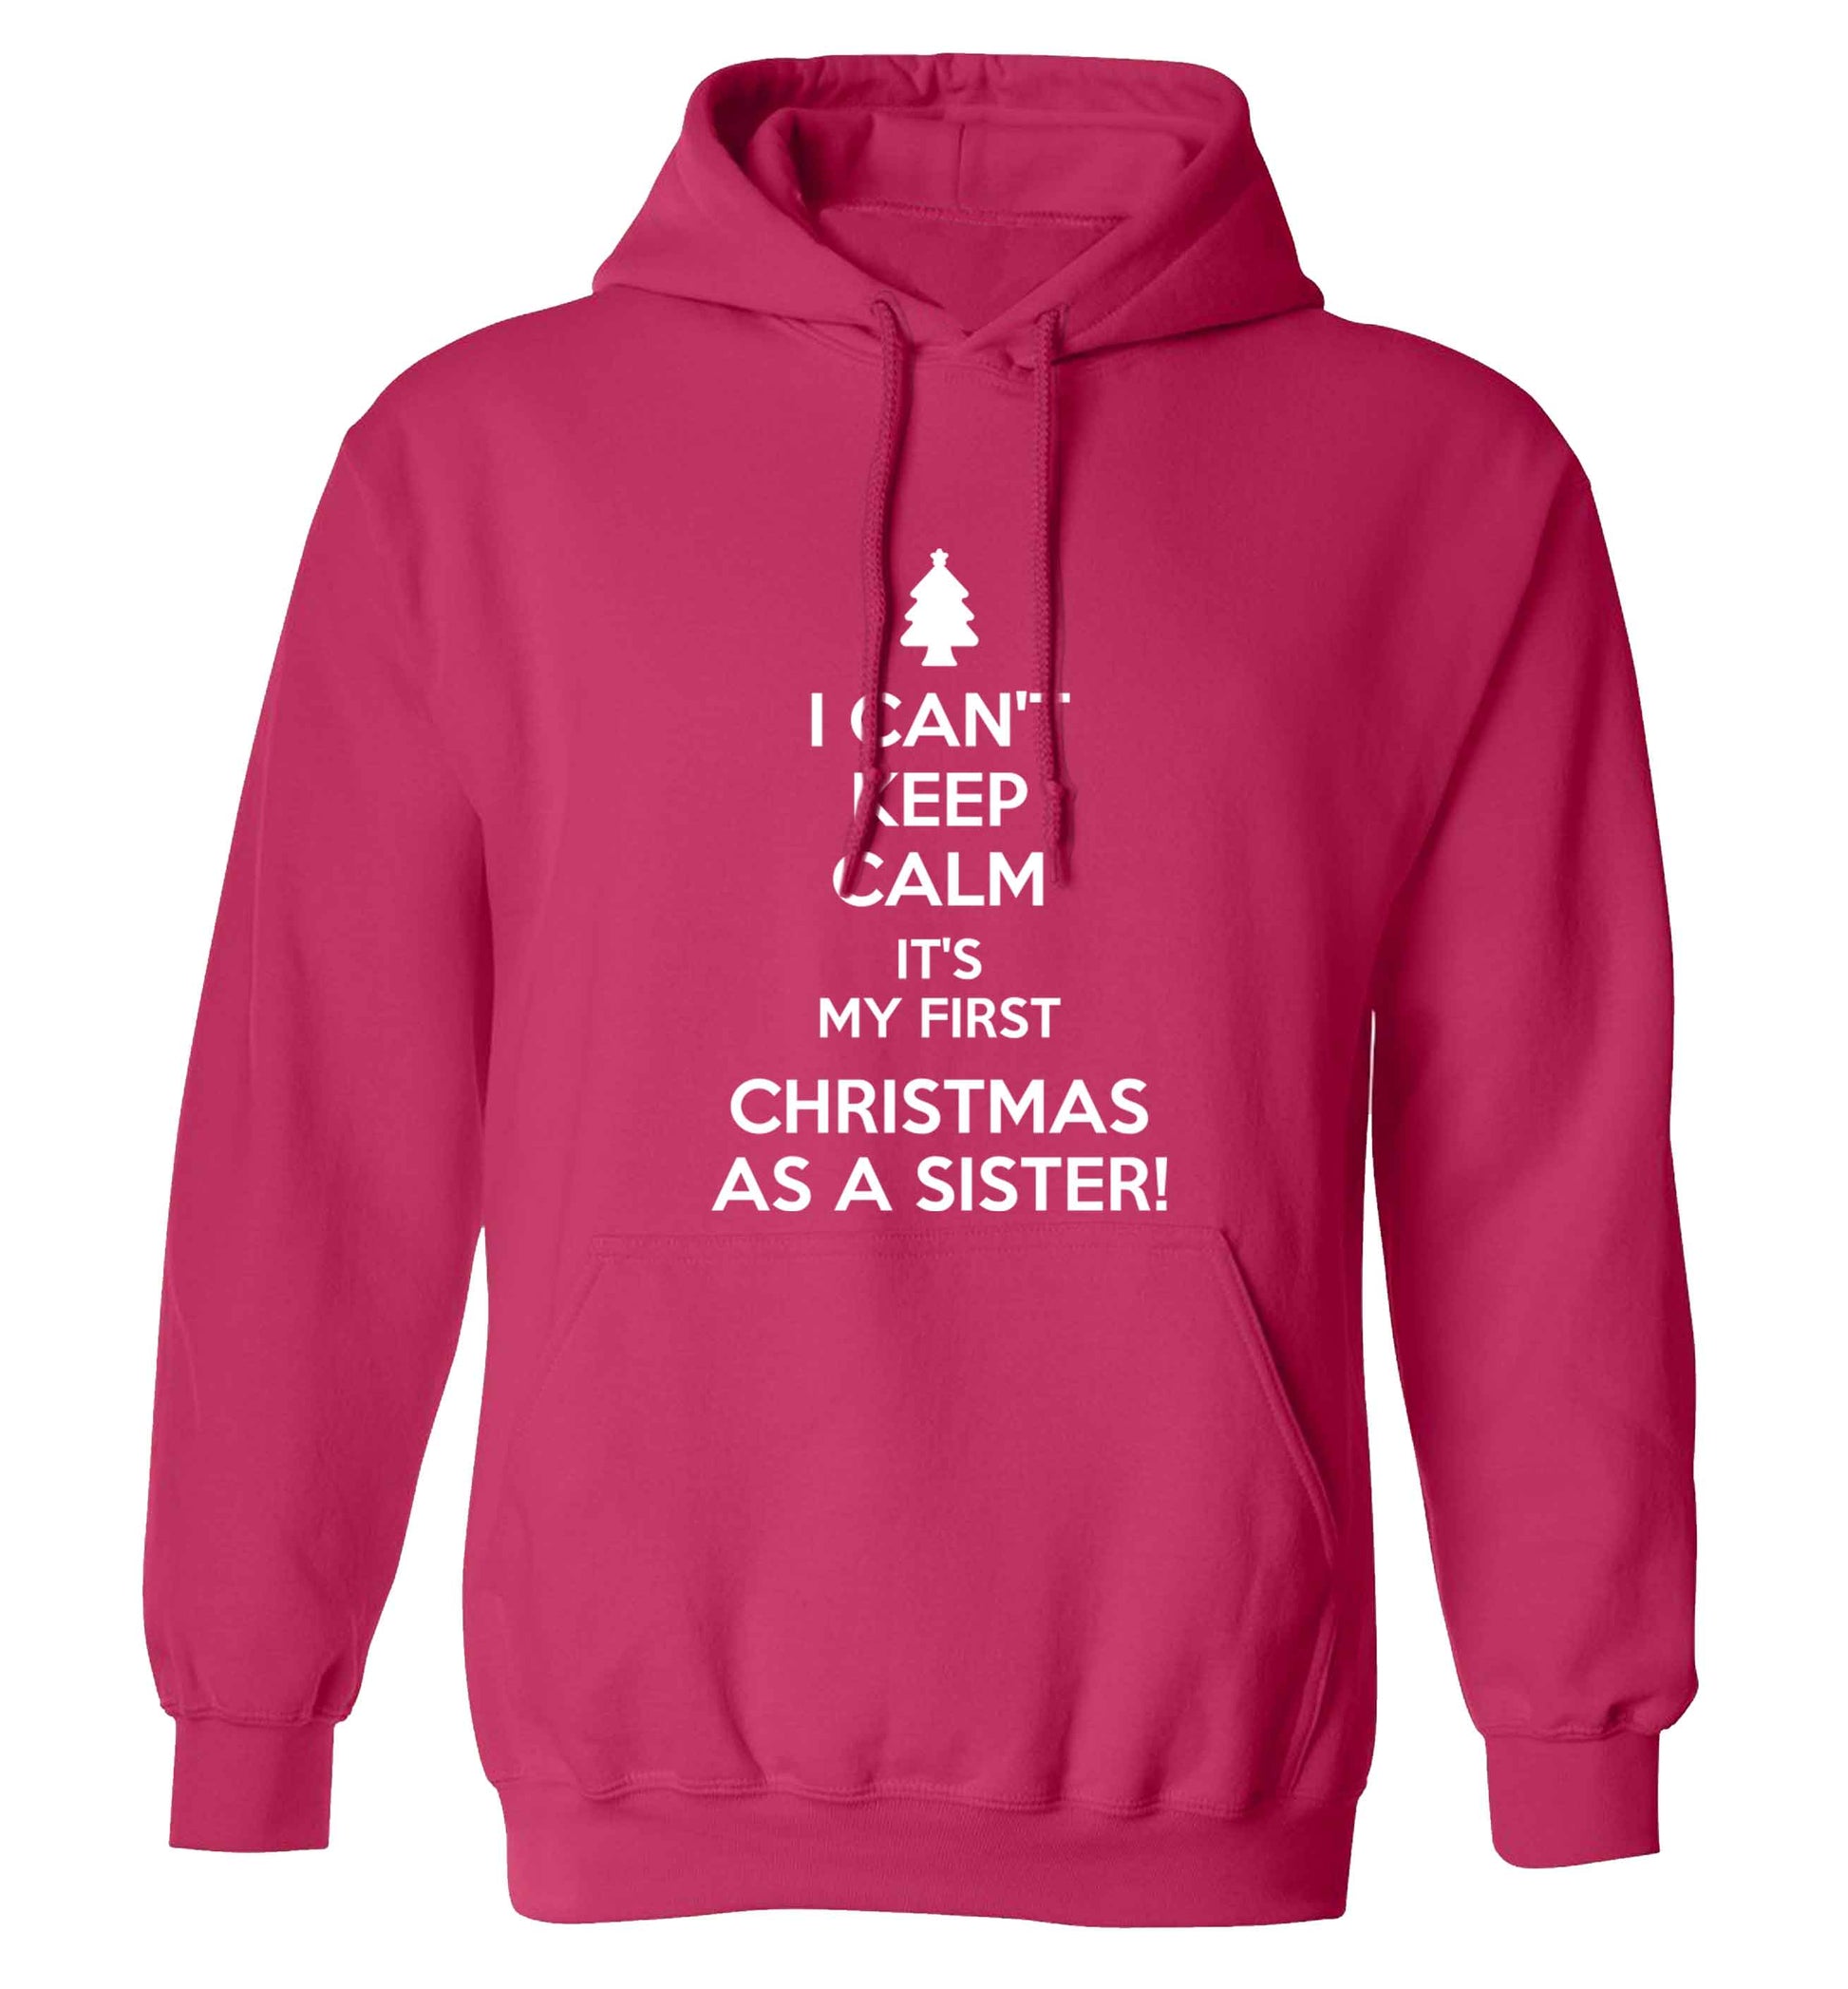 I can't keep calm it's my first Christmas as a sister! adults unisex pink hoodie 2XL